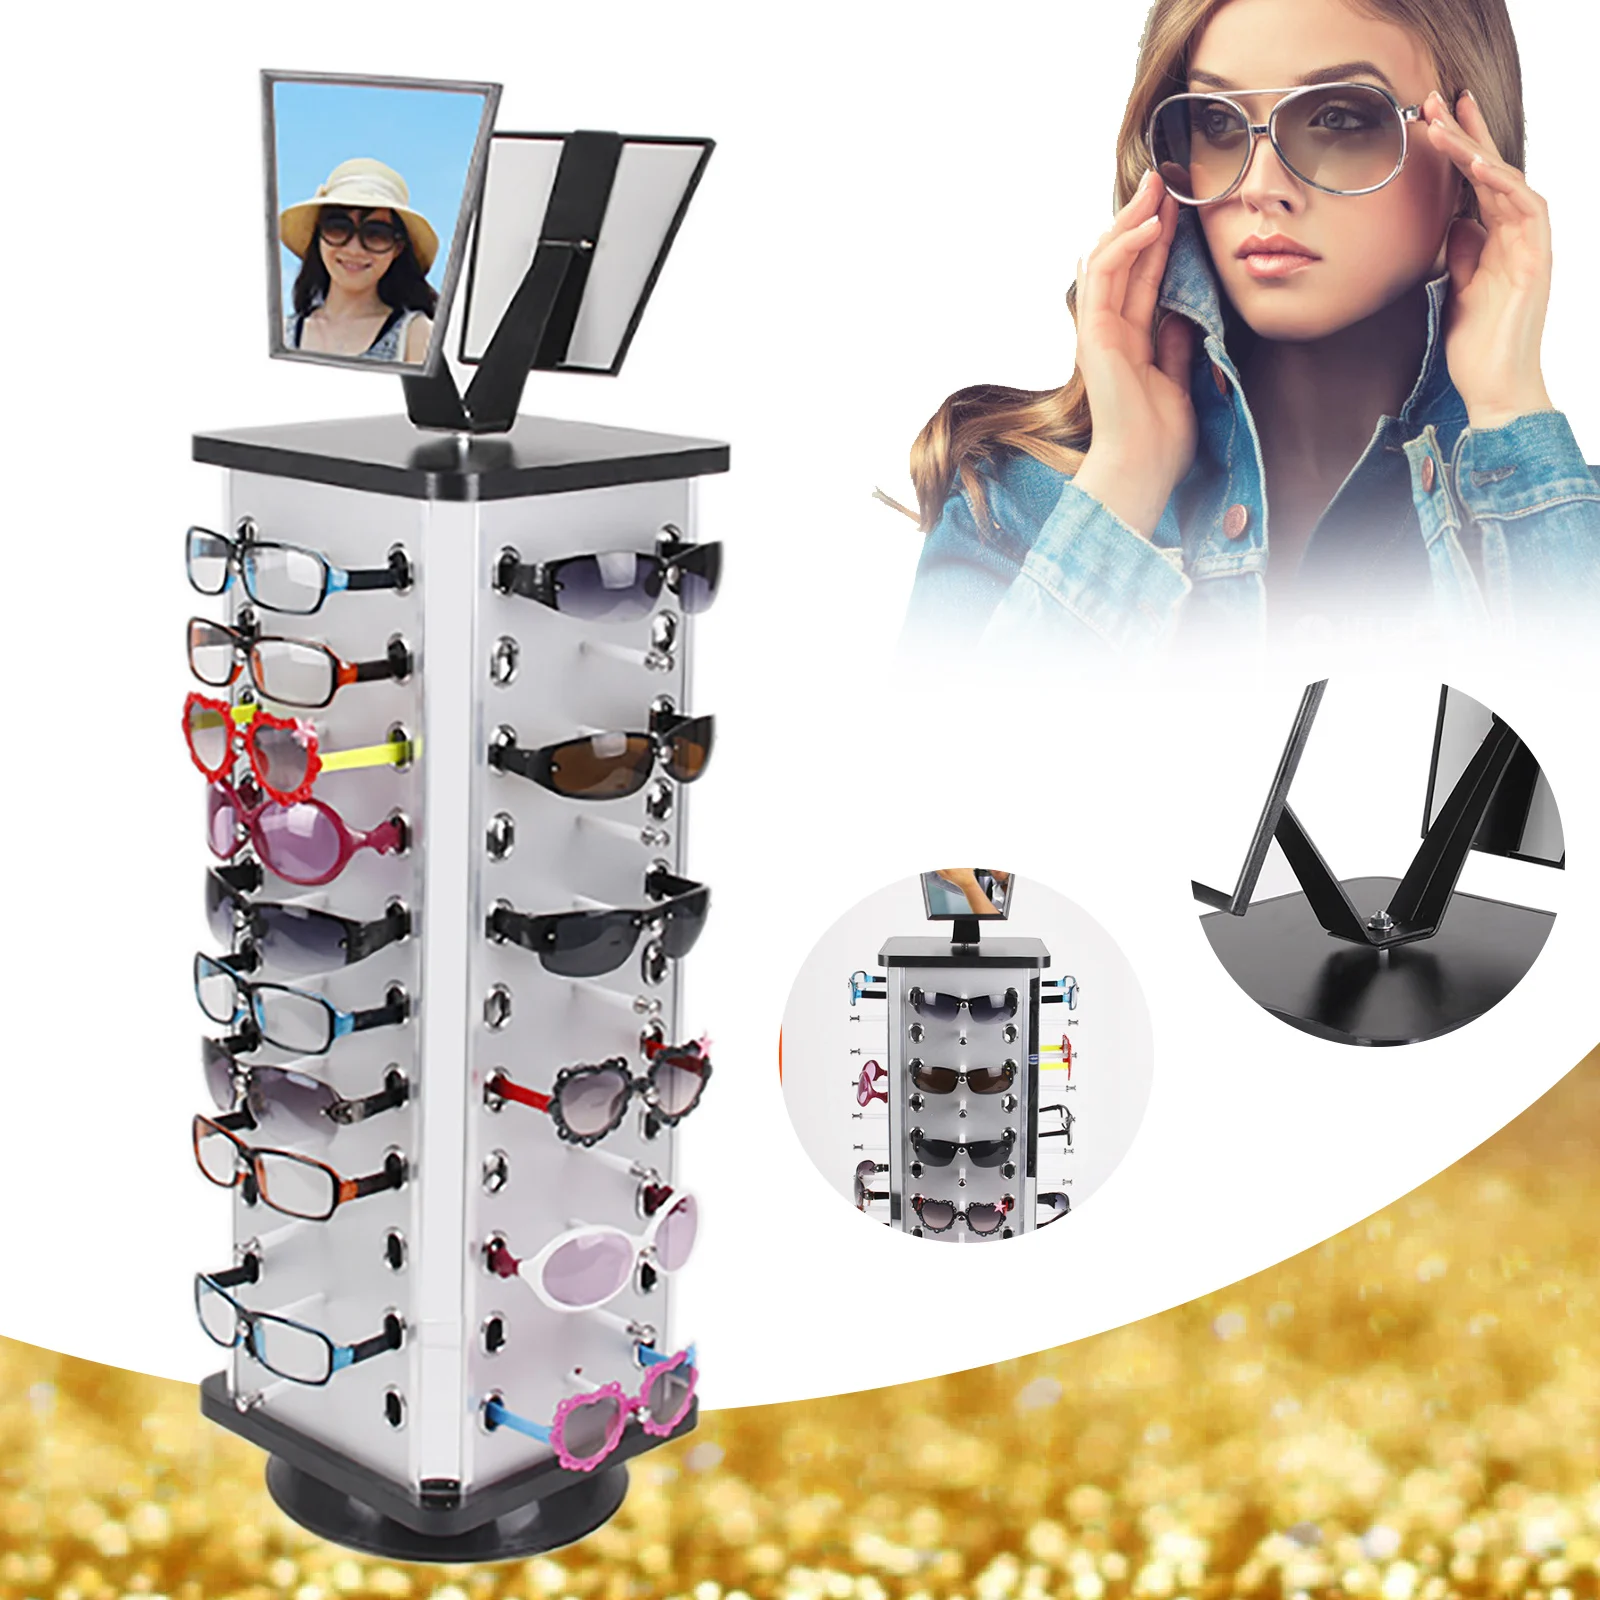 

Bymaocar Glasses Rack Holder Sunglasses Square Display Stand Storage Organizer 360° Rotating 44 Pairs with 2 Adjustable Mirrors